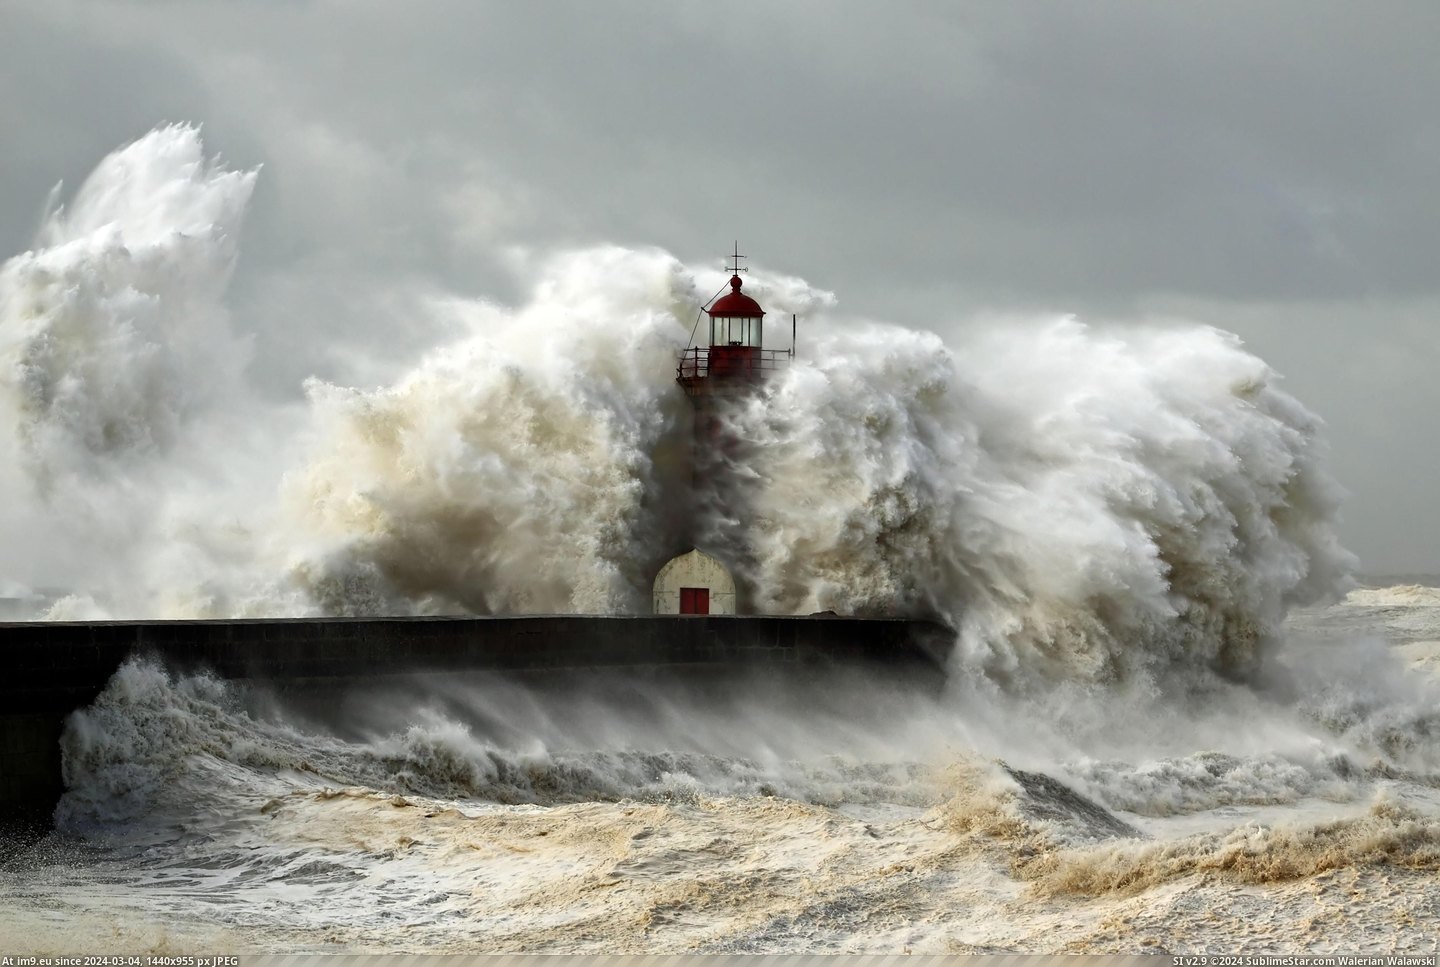 #Storm  #Lighthouse [Pics] Lighthouse in the Storm Pic. (Image of album My r/PICS favs))